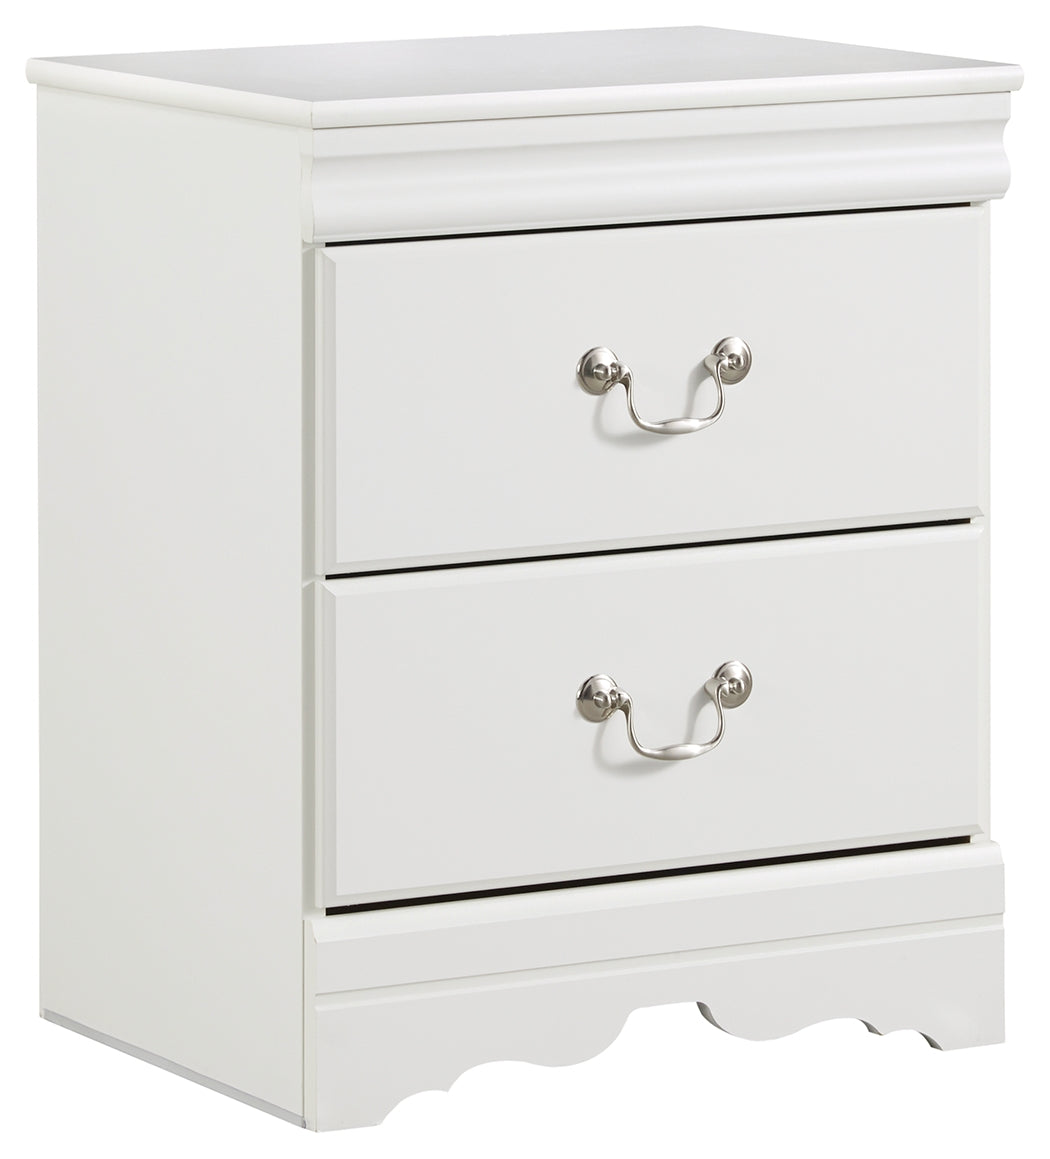 Anarasia White Queen Sleigh Bedroom Set with Dresser, Mirror and Nightstand